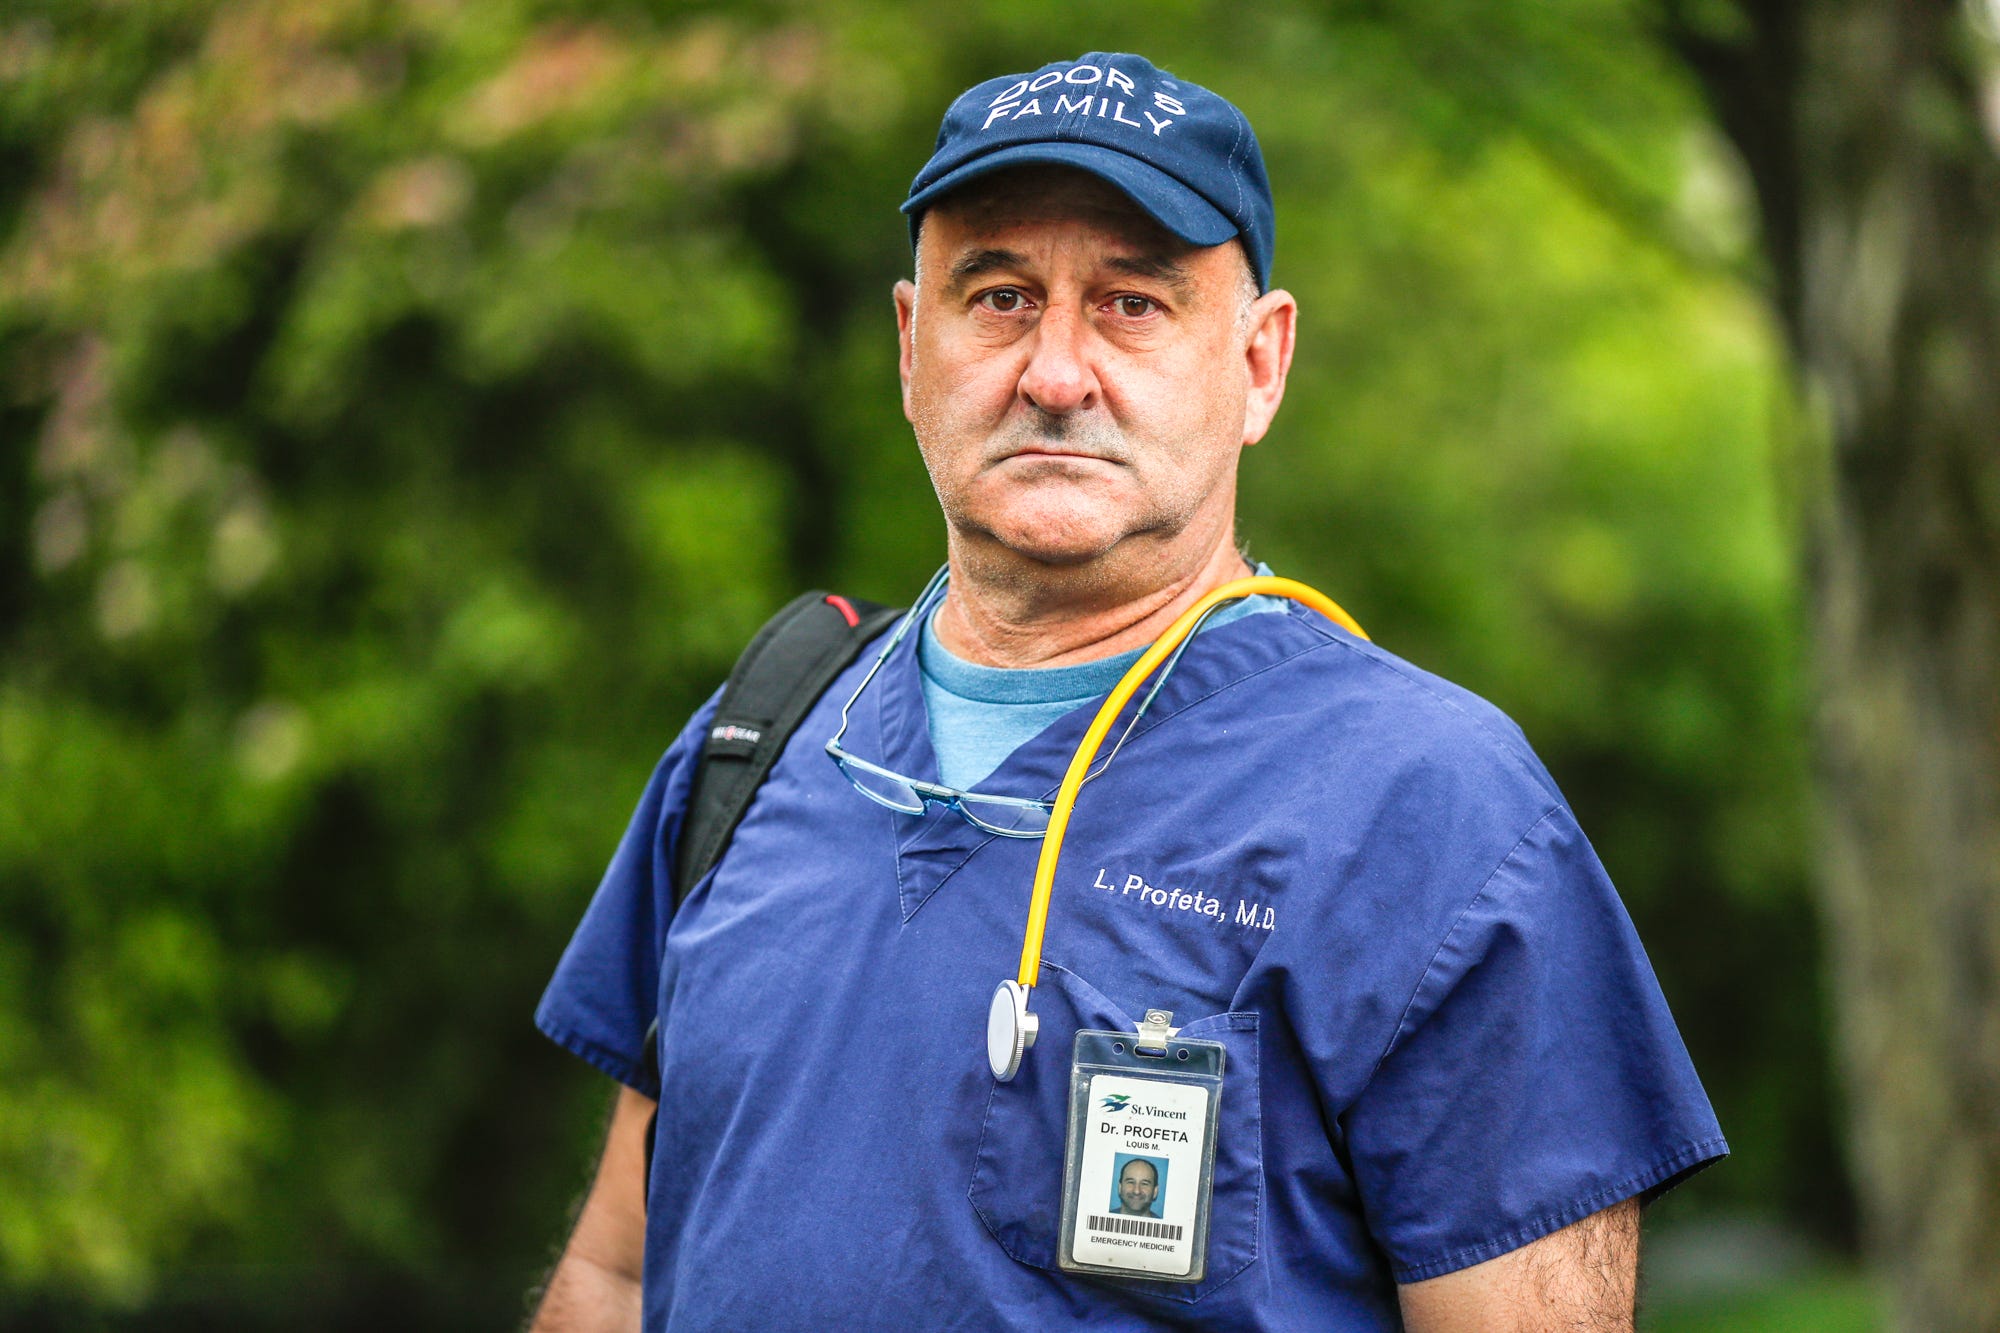 Dr. Louis Profeta, an emergency room physician at Ascension St. Vincent Fishers Hospital